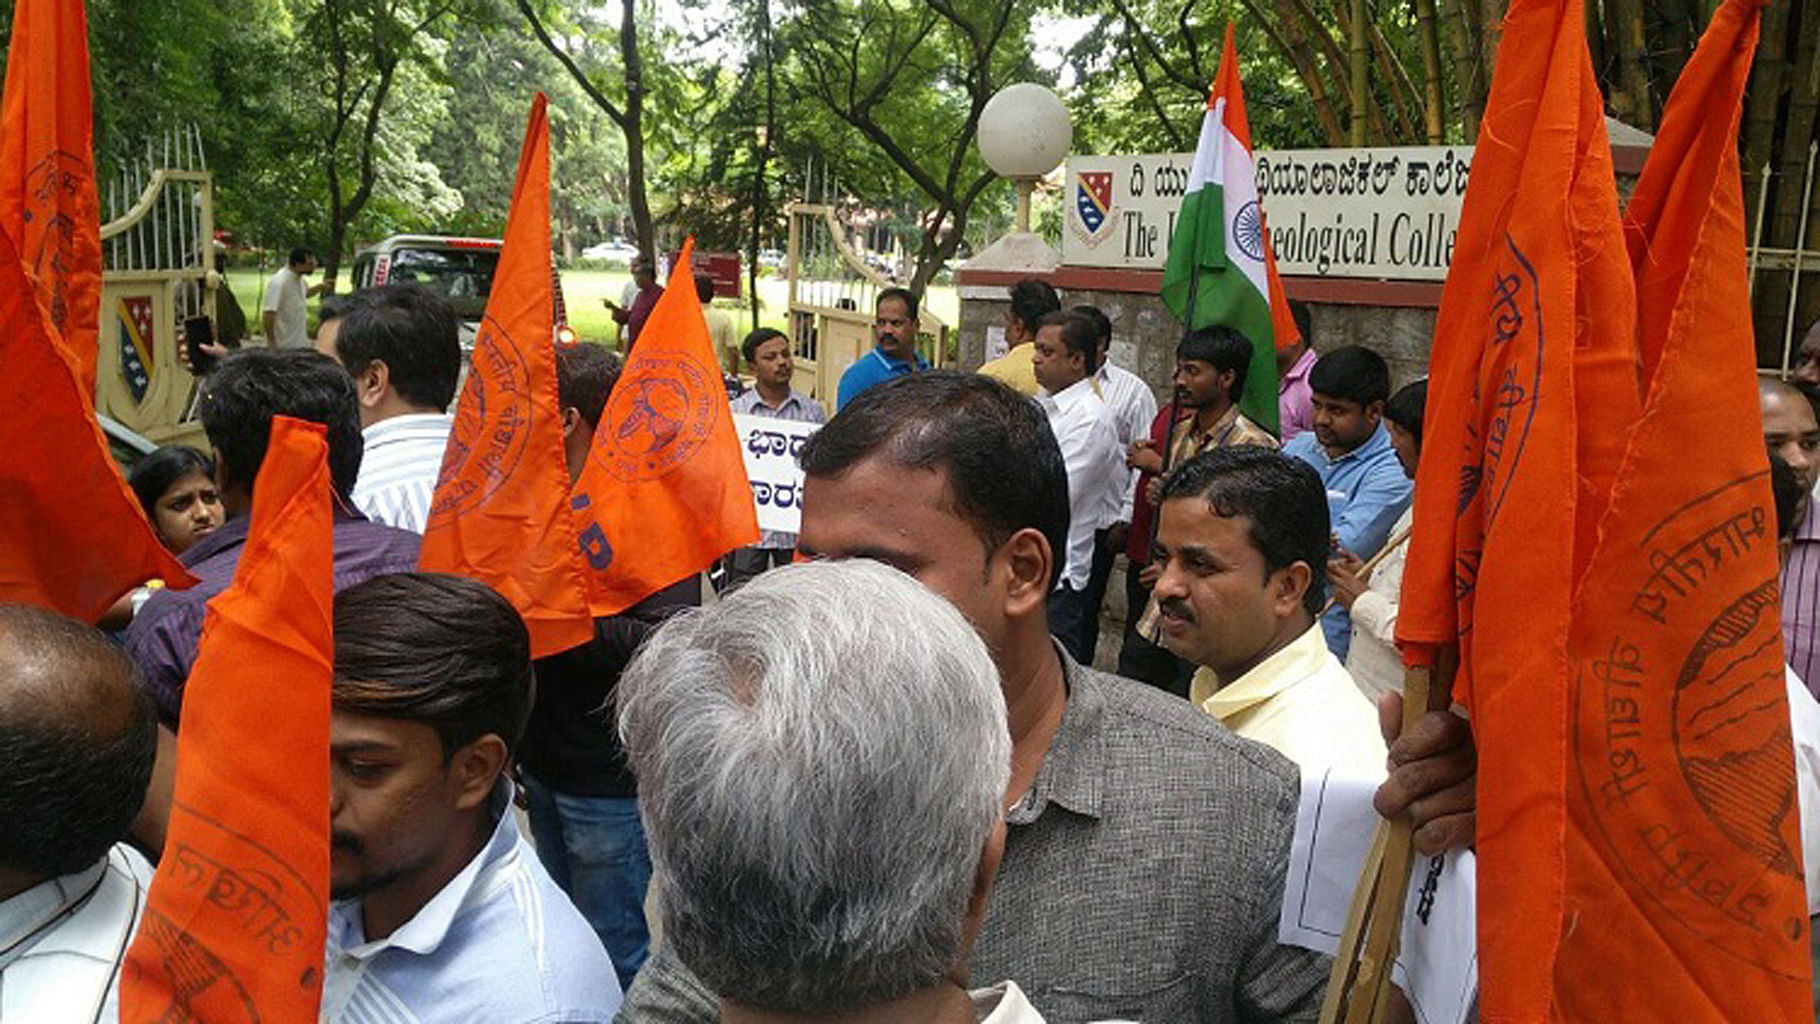 Members of the ABVP protested outside the United Theological College on Millers Road on Sunday morning. (Photo: The News Minute)